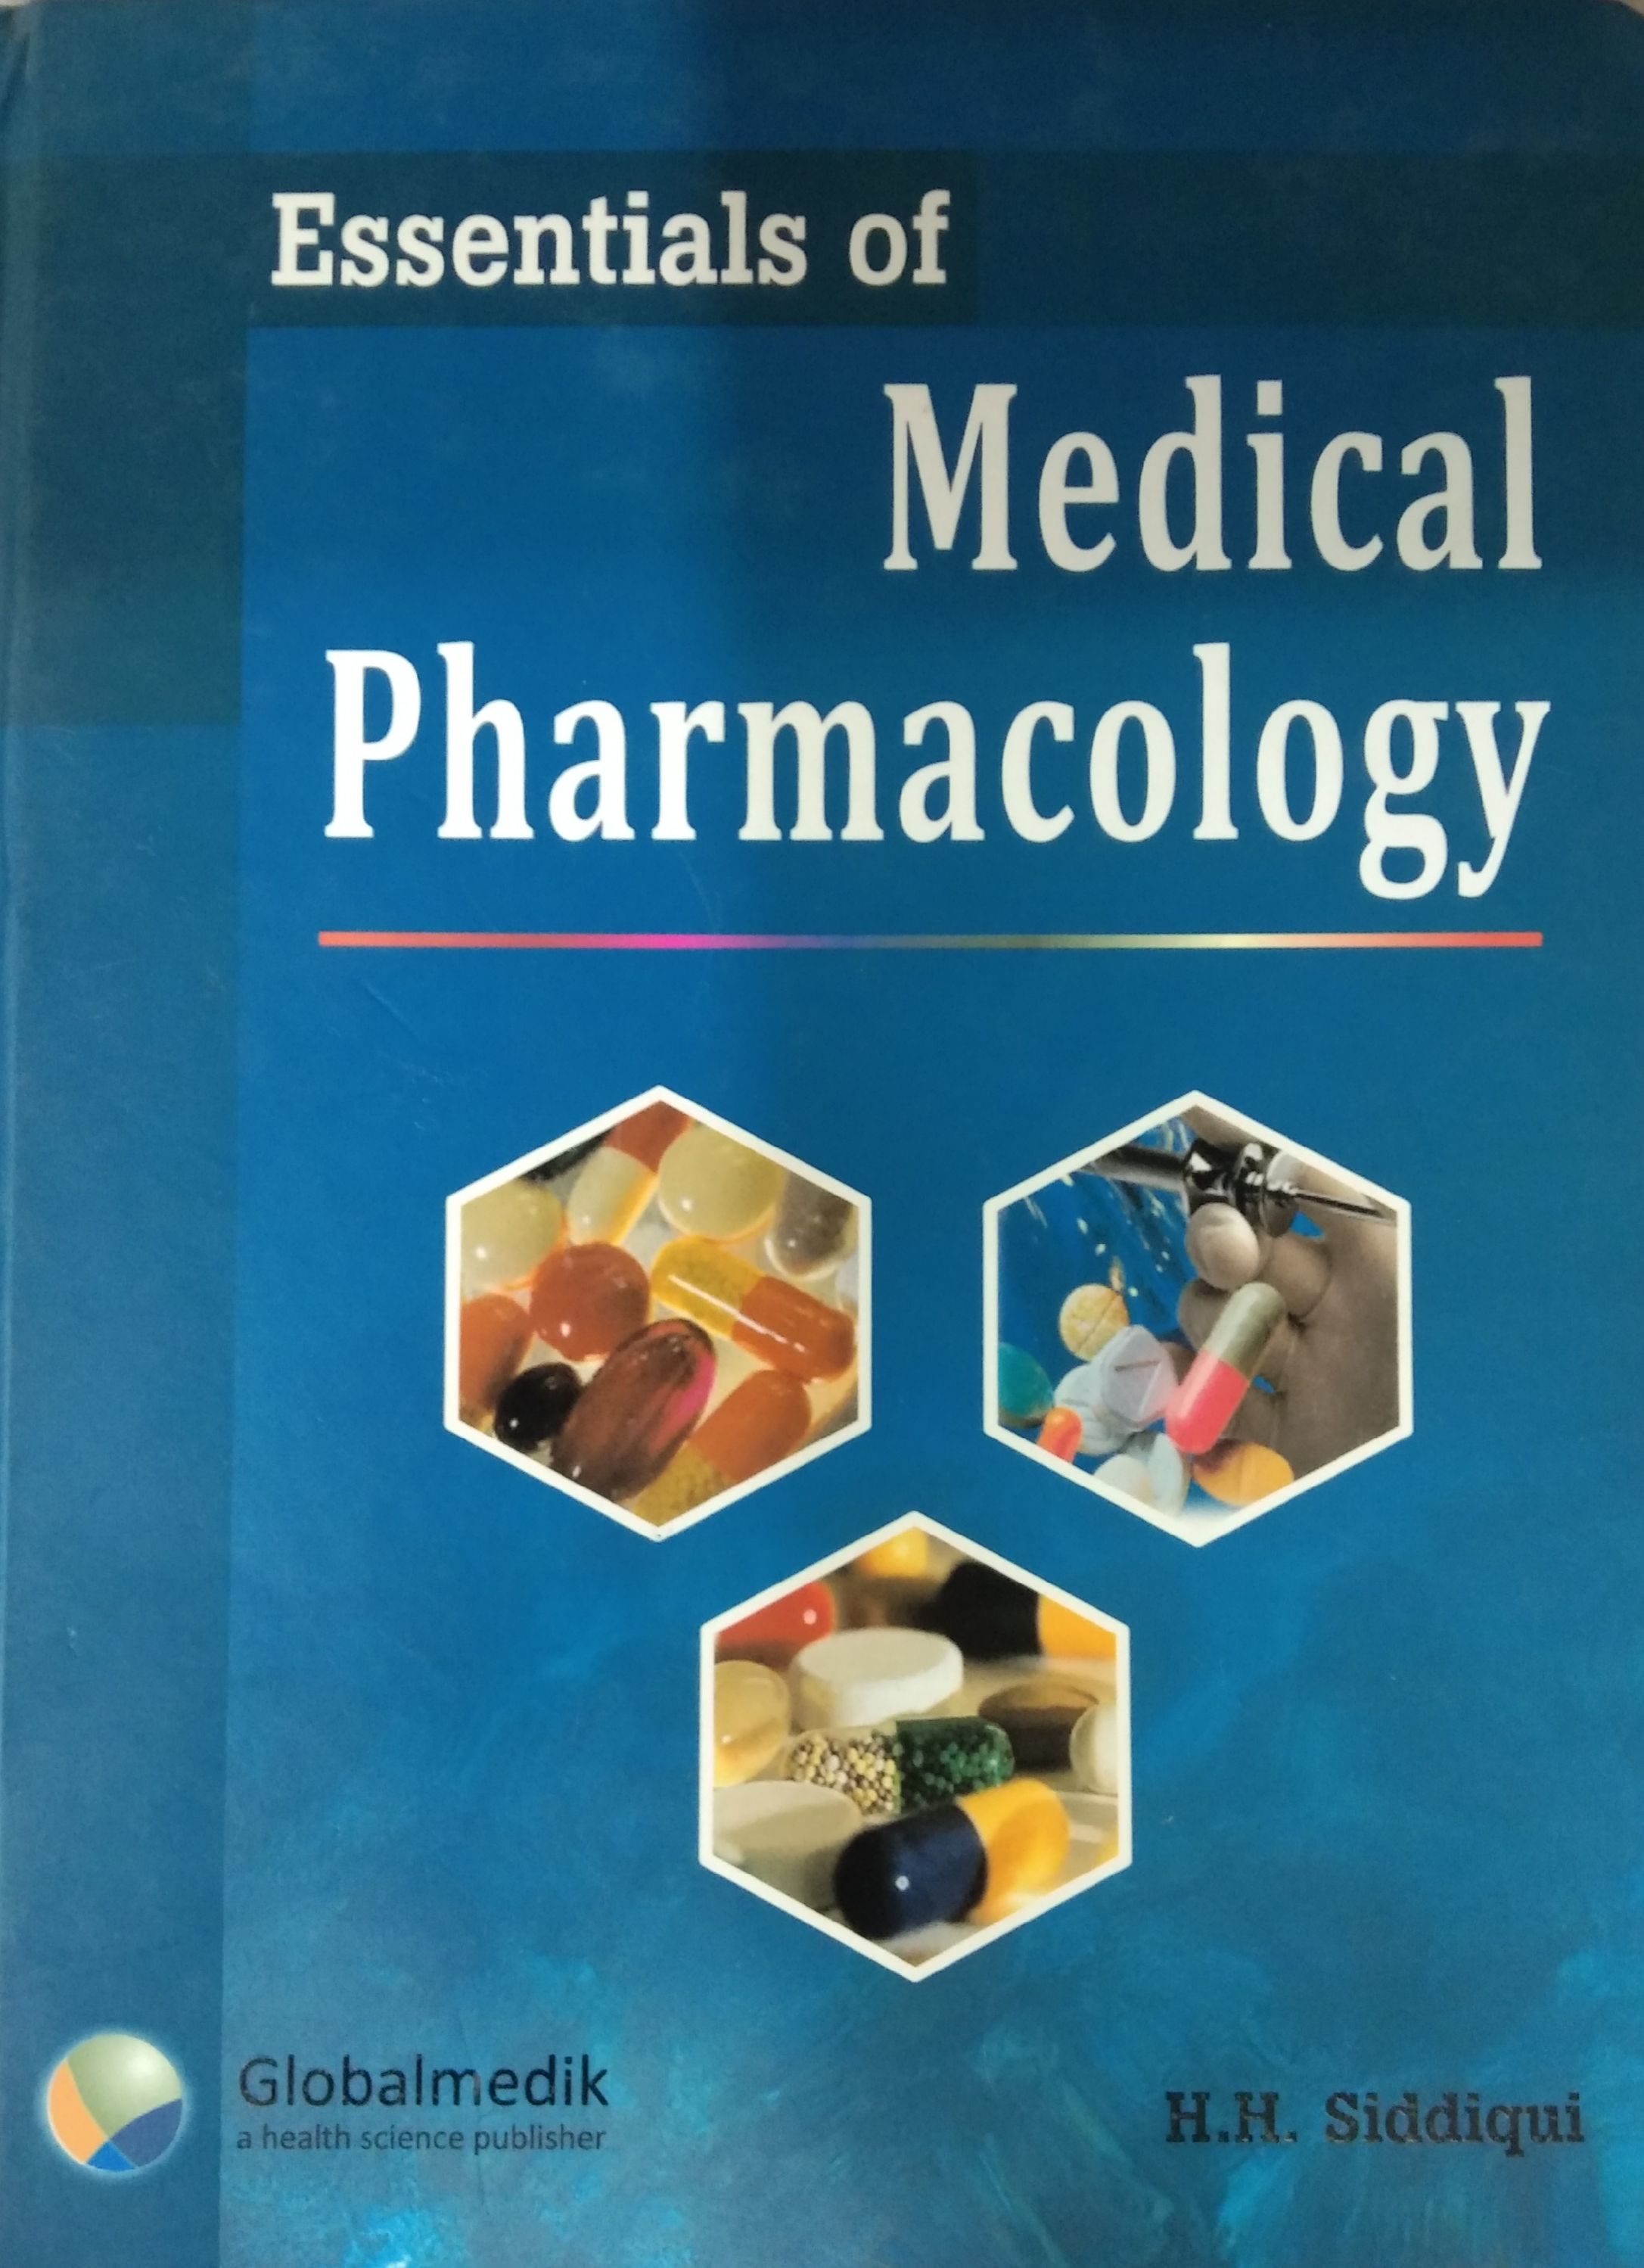 ESSENTIAL OF MEDICAL PHARMACOLOGY